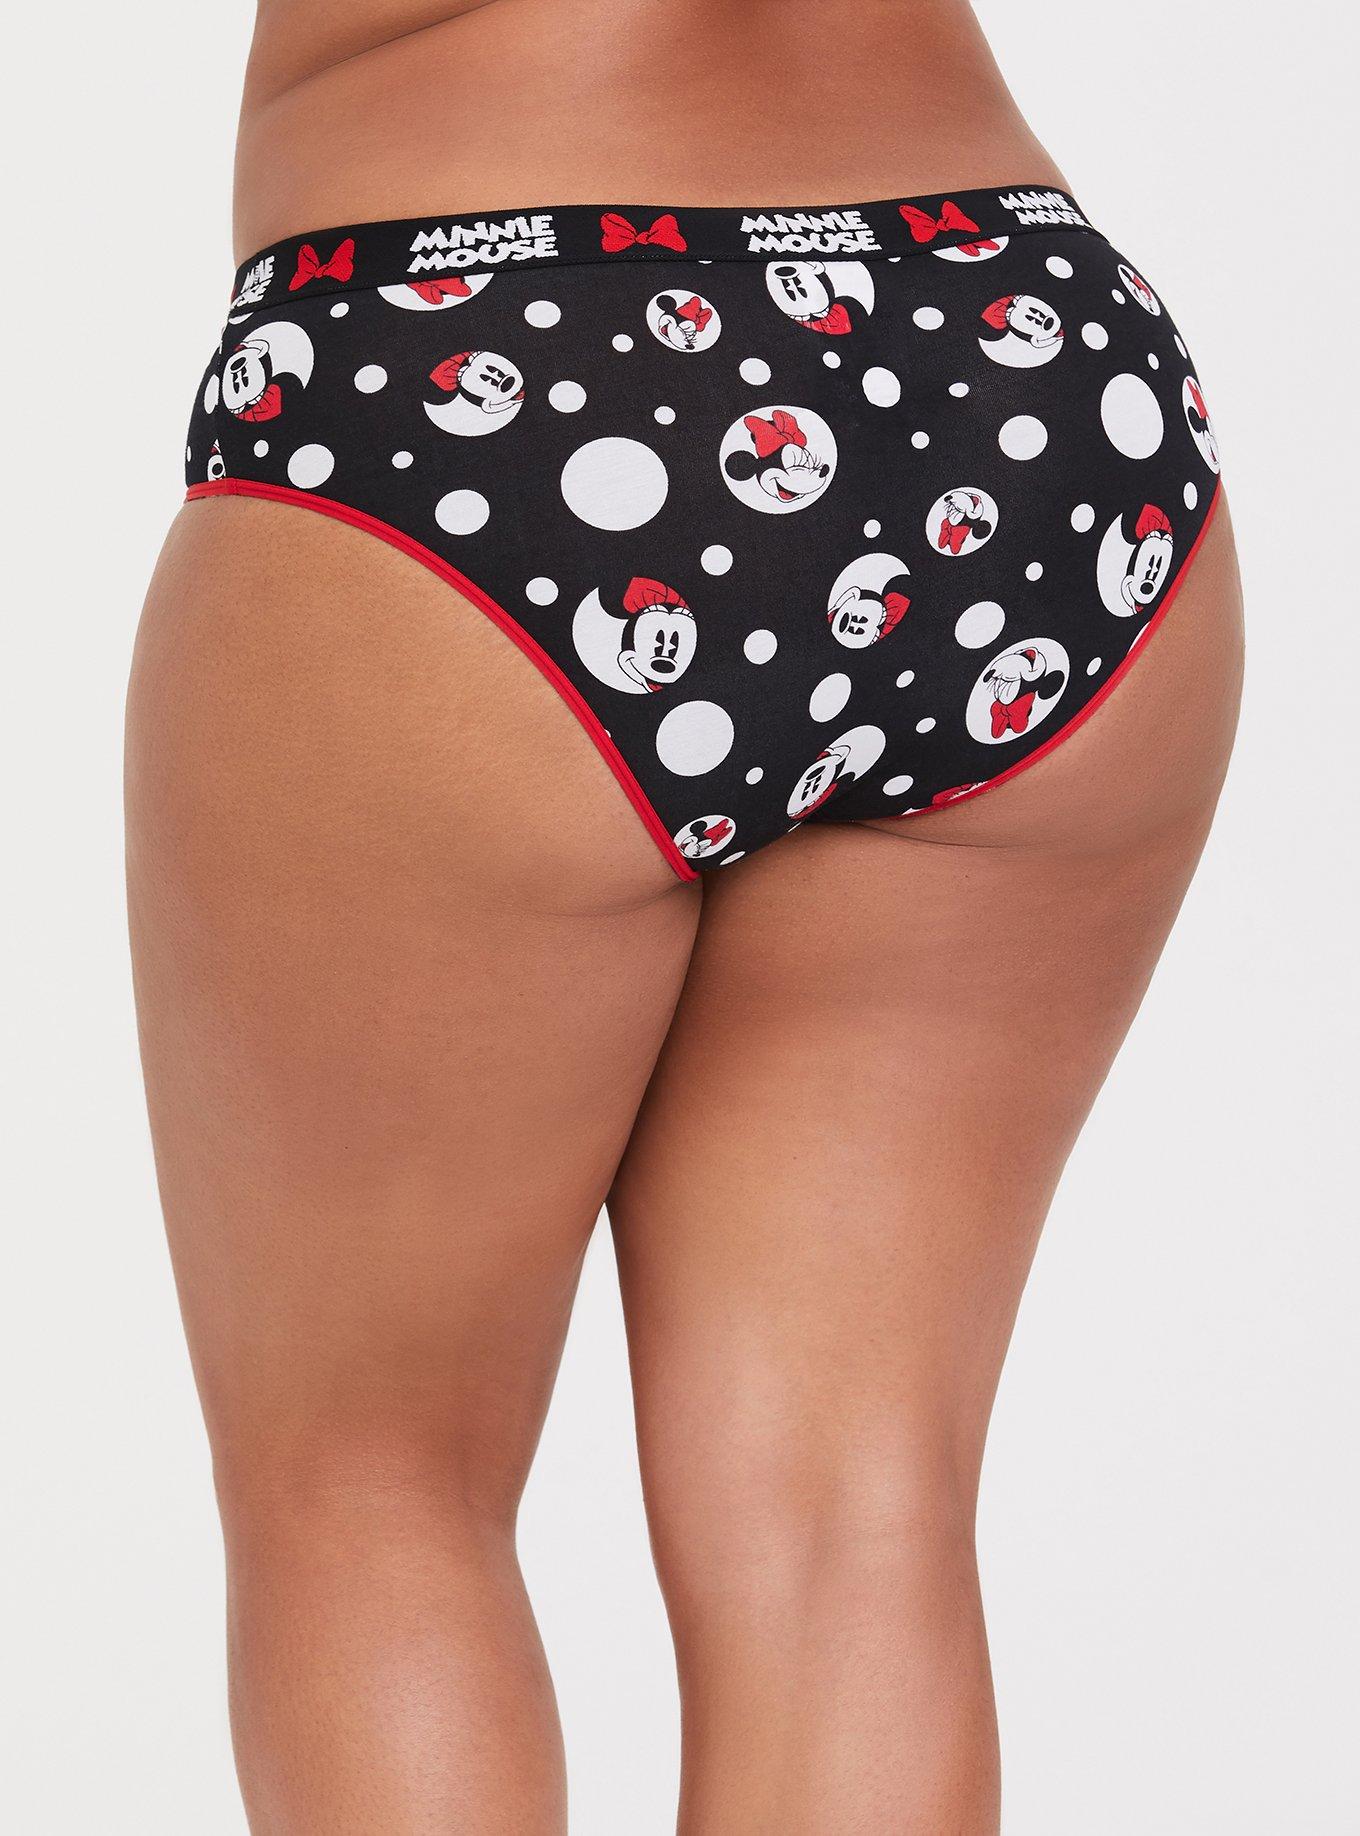 Disney Panties Minnie Mouse Womens Size L THREE PAIR Hipsters Gray